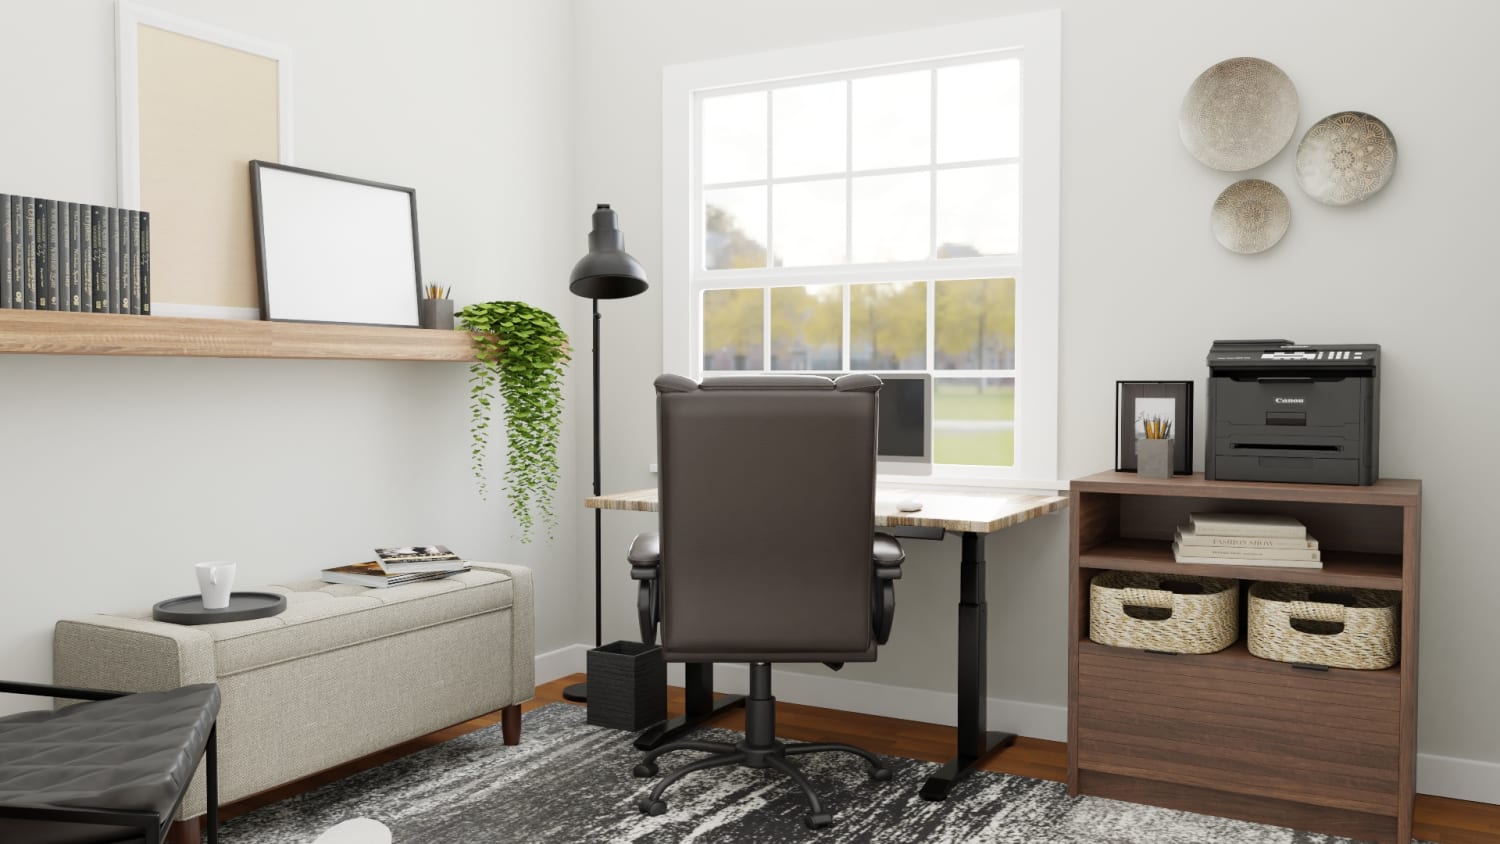 Get Inspiration From Masculine Spaces Modern Industrial Home Office Design By Spacejoy